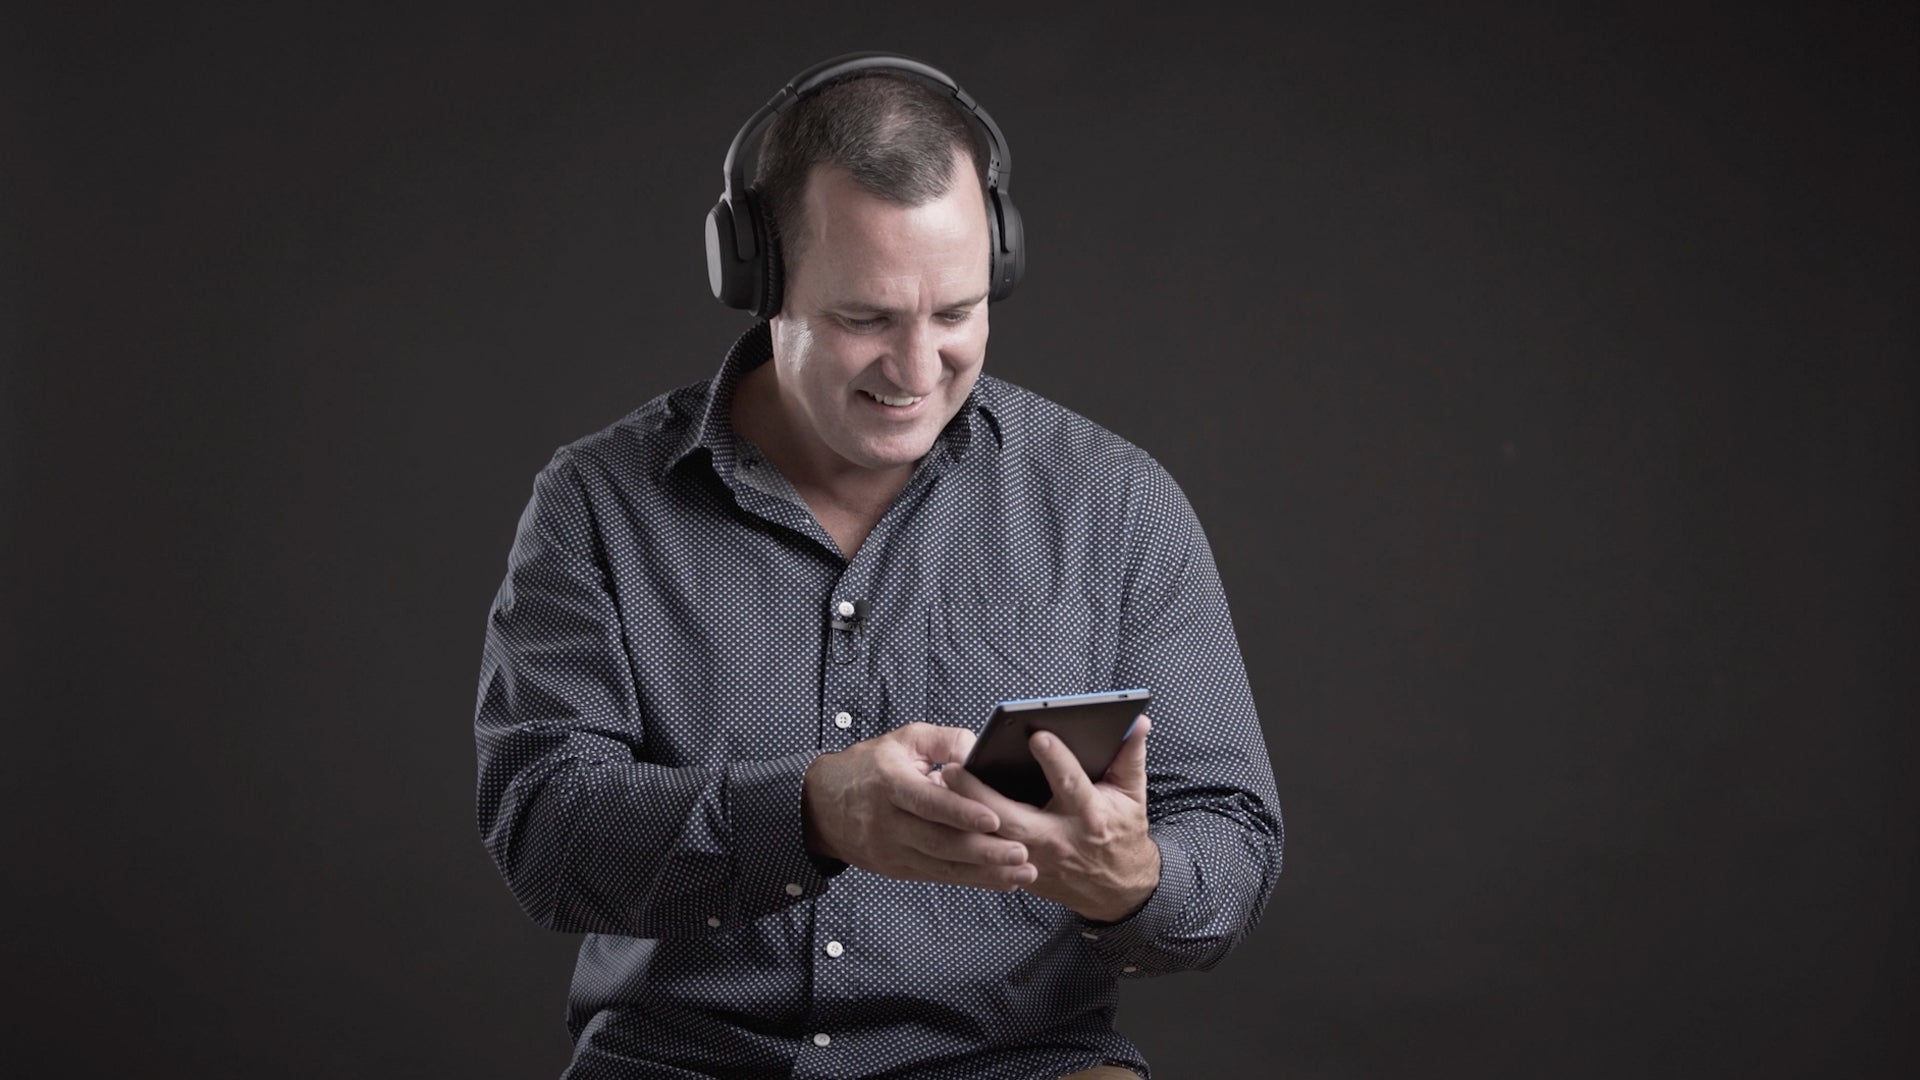 A man wearing Audeara headphones, smiling and looking down at a phone doing the hearing health check using the Audeara app